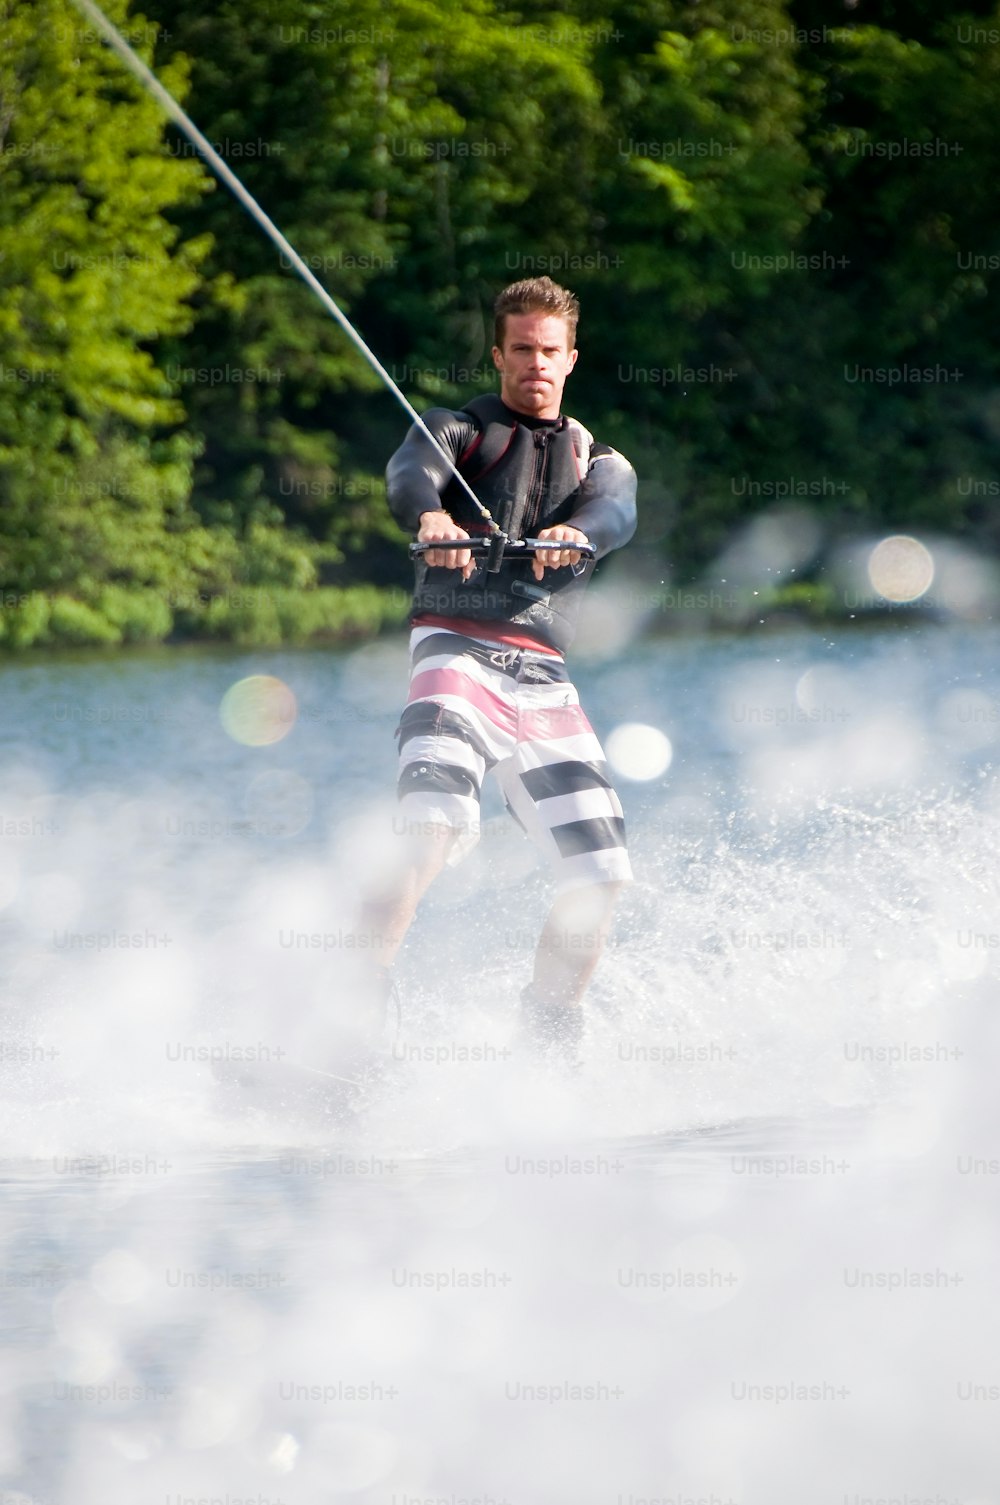 a man riding a water ski on top of a lake